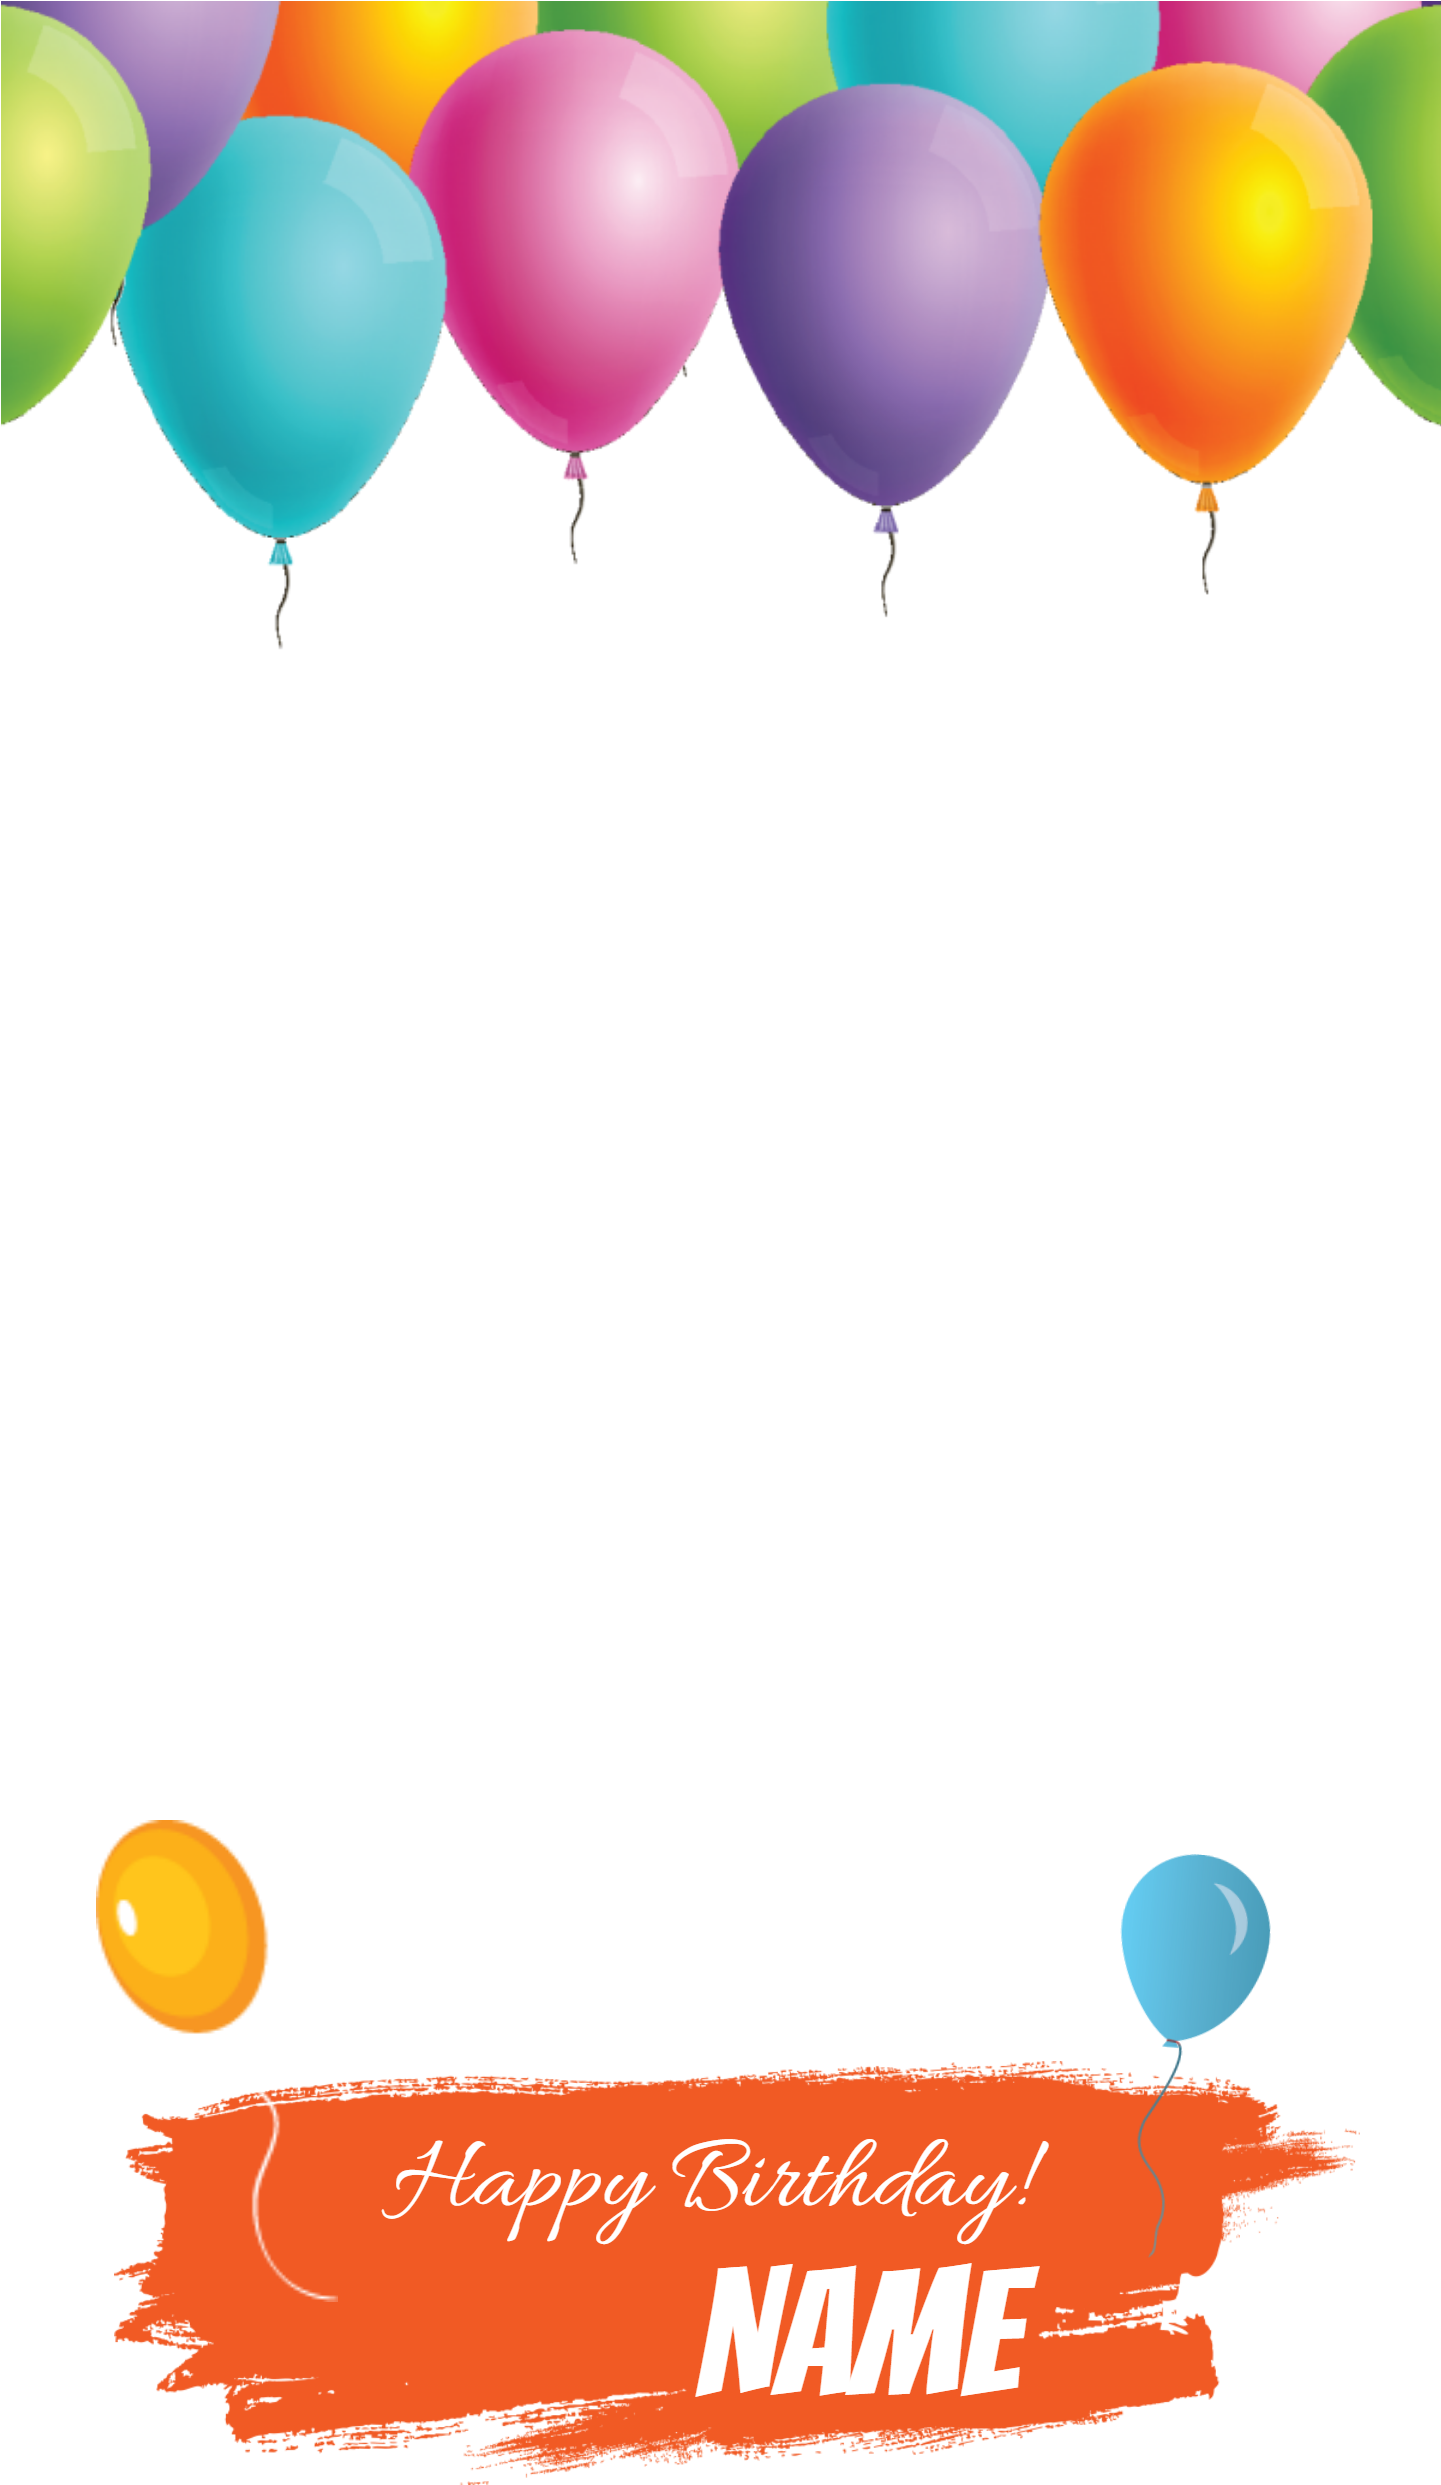 Click To Customize - Cme Group (1440x2560)